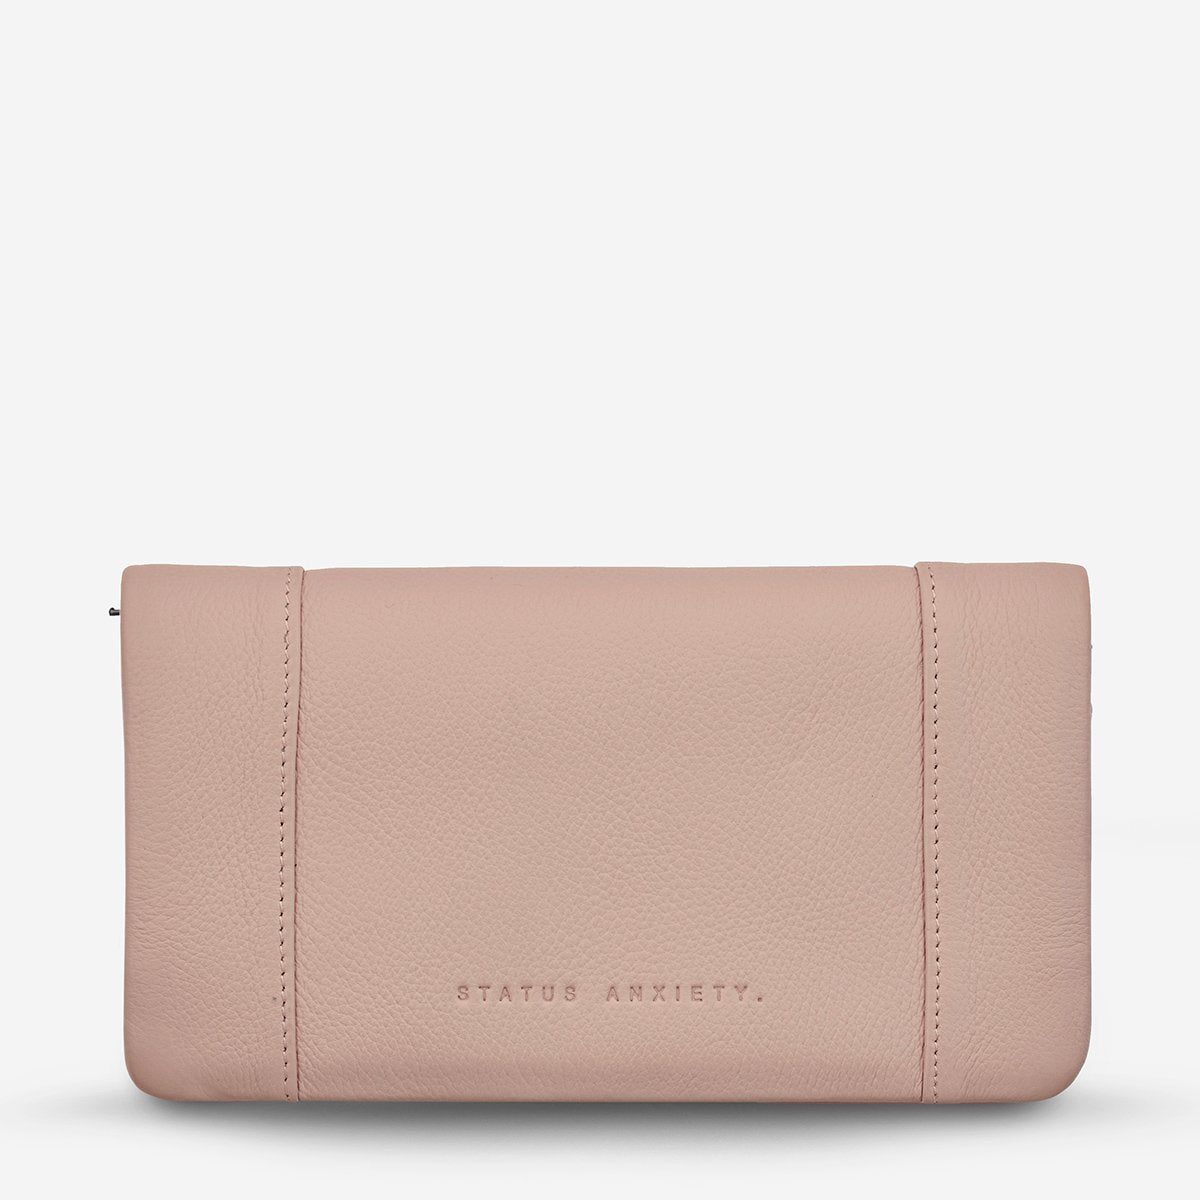 Status Anxiety Some Type of Love Wallet in Dusty Pink Front View